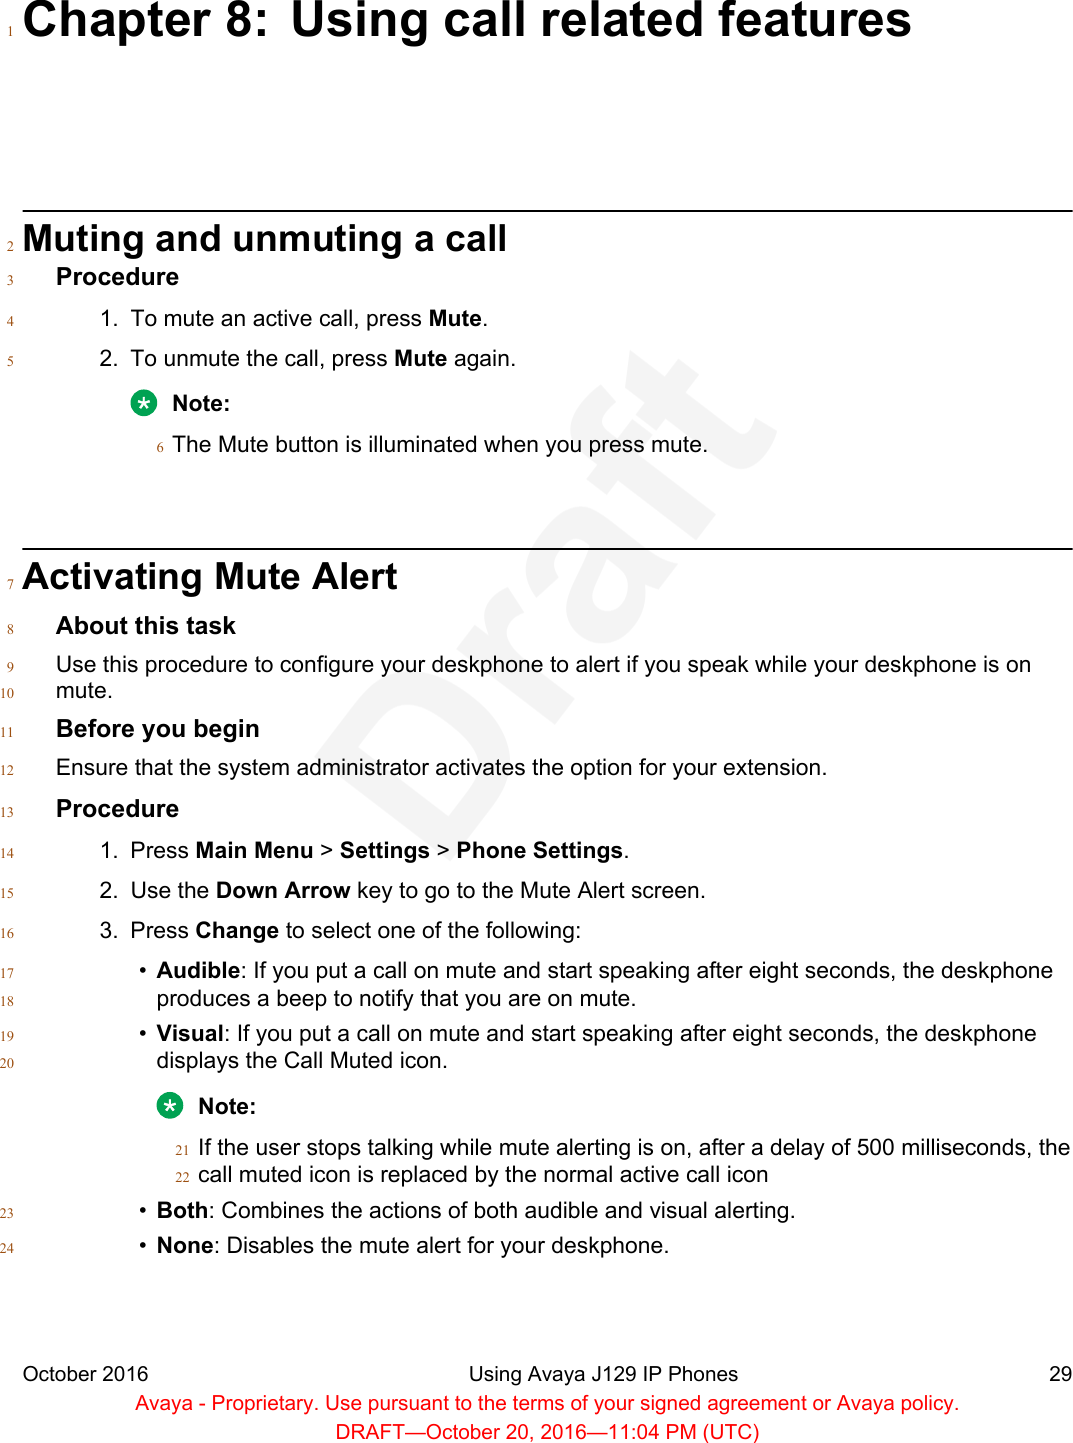 Chapter 8: Using call related features1Muting and unmuting a call2Procedure31. To mute an active call, press Mute.42. To unmute the call, press Mute again.5Note:The Mute button is illuminated when you press mute.6Activating Mute Alert7About this task8Use this procedure to configure your deskphone to alert if you speak while your deskphone is on9mute.10Before you begin11Ensure that the system administrator activates the option for your extension.12Procedure131. Press Main Menu &gt; Settings &gt; Phone Settings.142. Use the Down Arrow key to go to the Mute Alert screen.153. Press Change to select one of the following:16•Audible: If you put a call on mute and start speaking after eight seconds, the deskphone17produces a beep to notify that you are on mute.18•Visual: If you put a call on mute and start speaking after eight seconds, the deskphone19displays the Call Muted icon.20Note:If the user stops talking while mute alerting is on, after a delay of 500 milliseconds, the21call muted icon is replaced by the normal active call icon22•Both: Combines the actions of both audible and visual alerting.23•None: Disables the mute alert for your deskphone.24October 2016 Using Avaya J129 IP Phones 29Avaya - Proprietary. Use pursuant to the terms of your signed agreement or Avaya policy.DRAFT—October 20, 2016—11:04 PM (UTC)